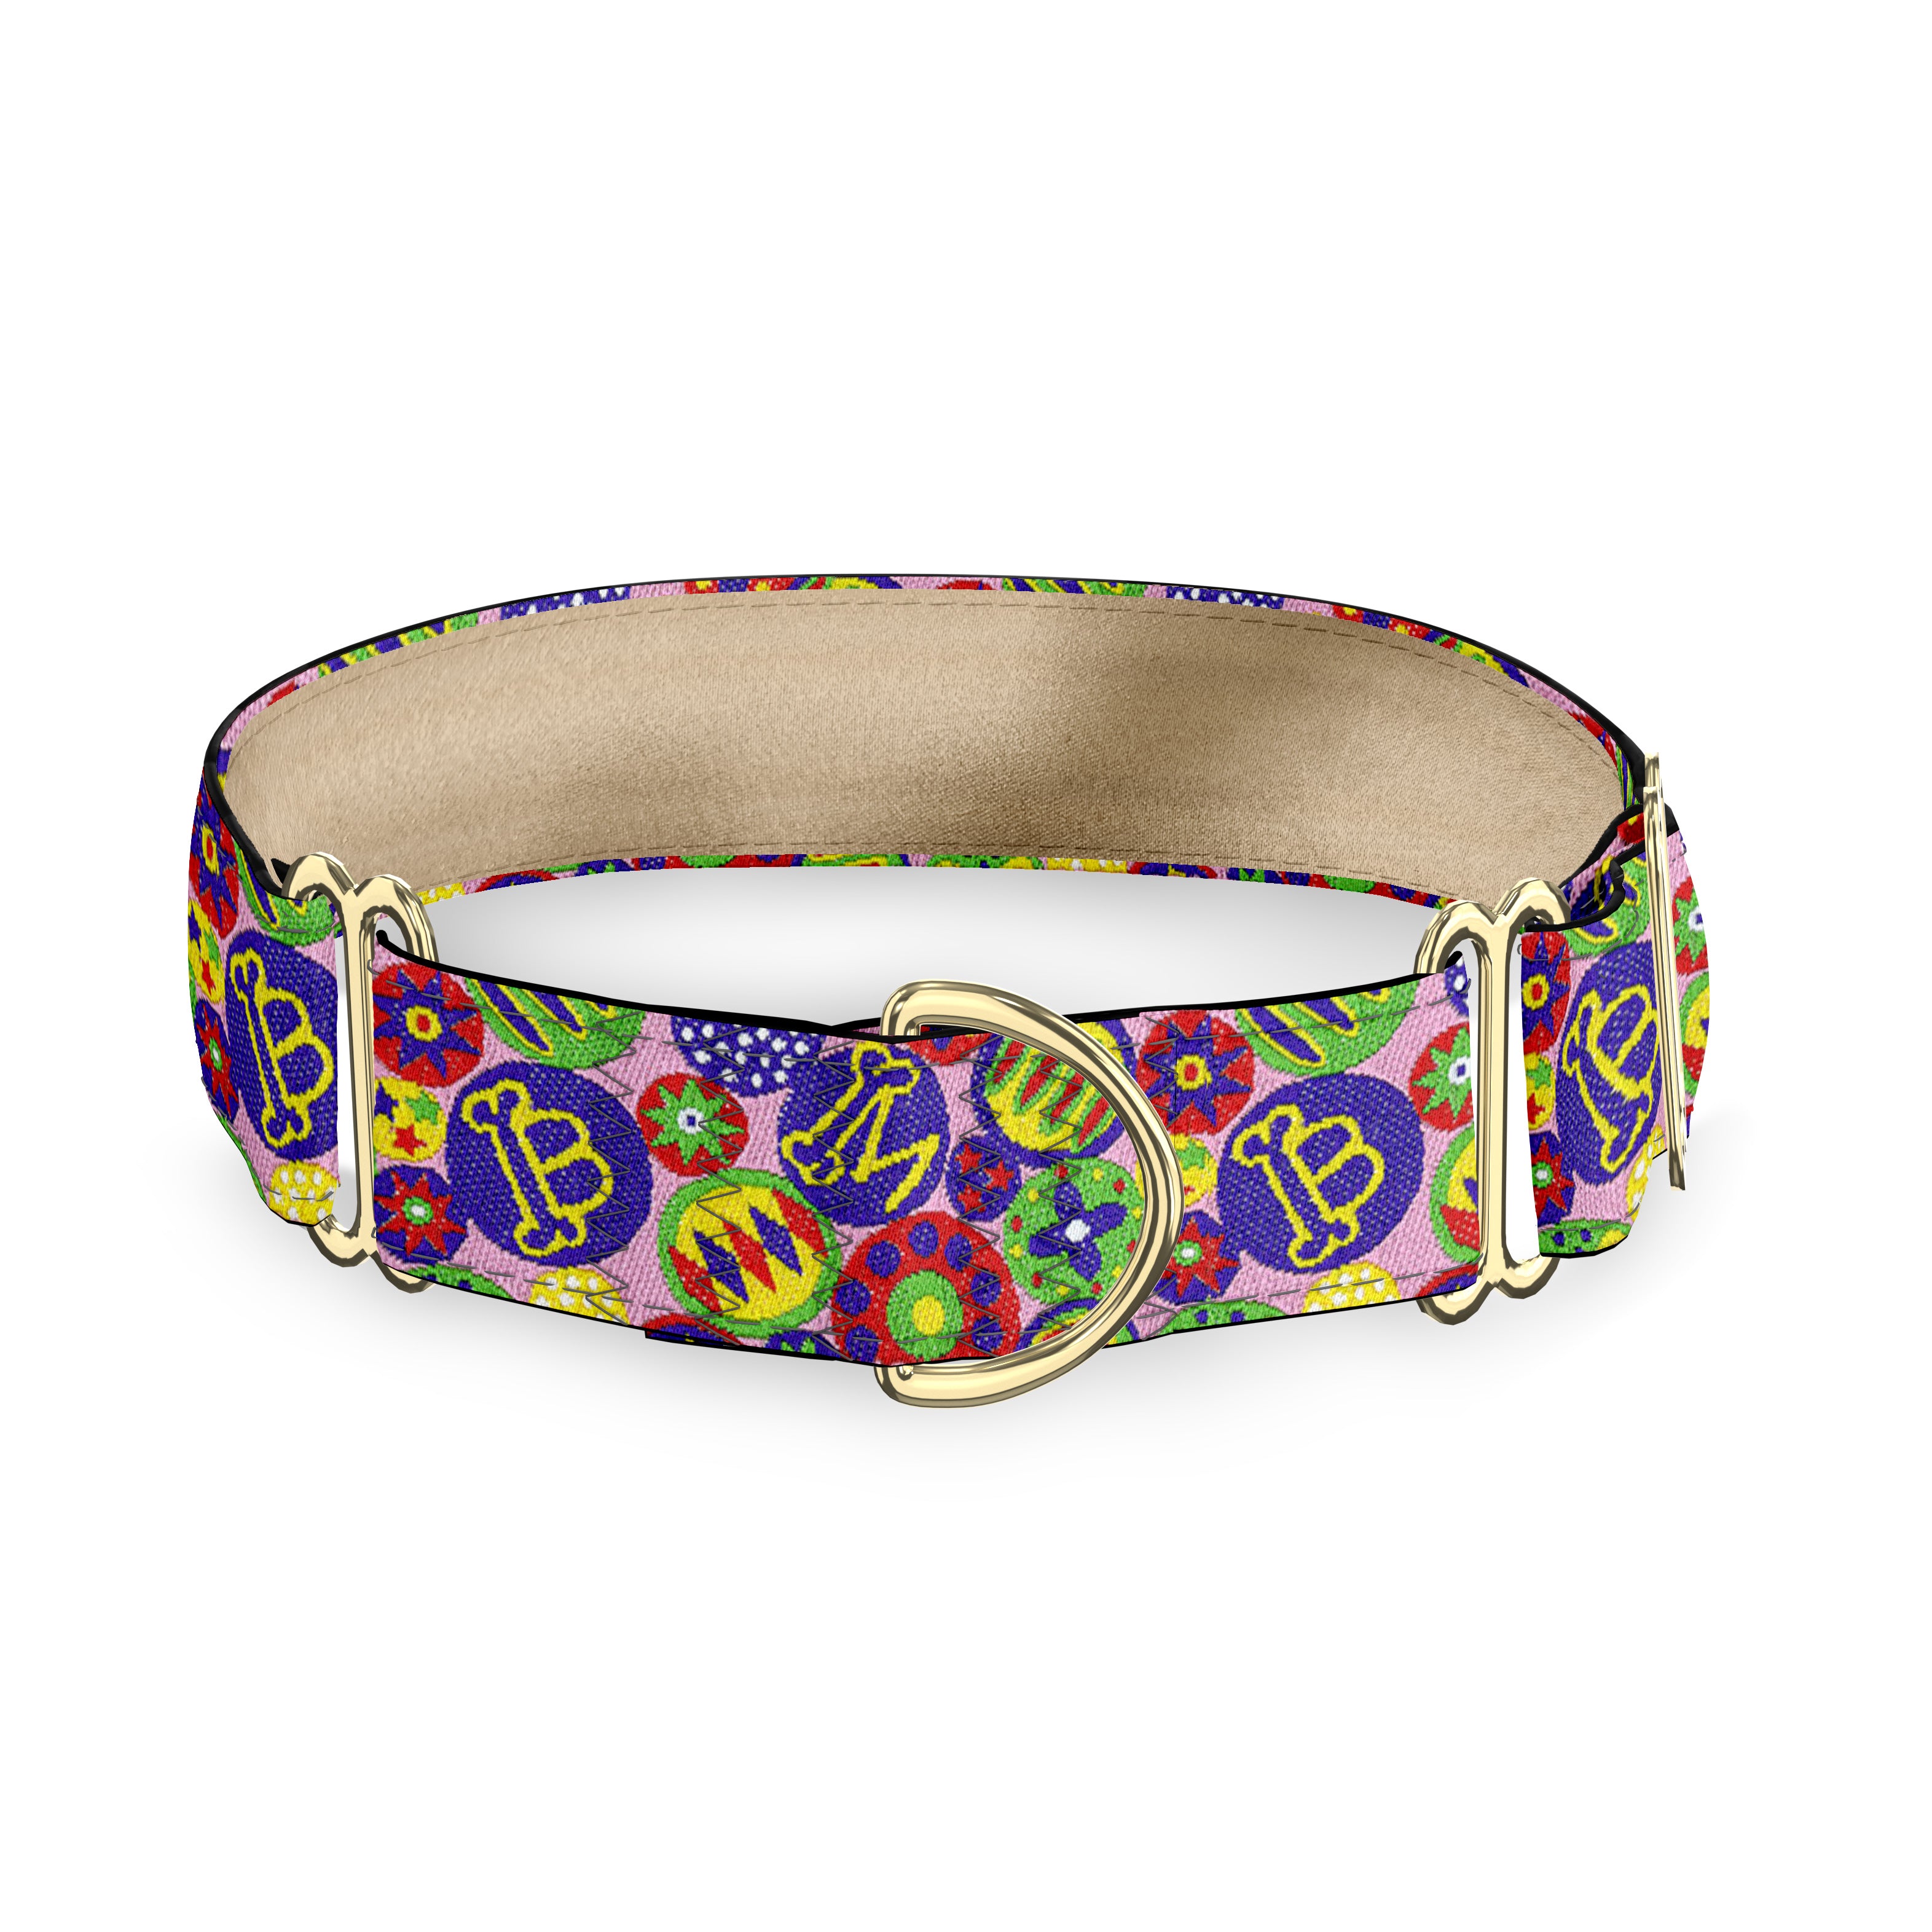 Small Purple Pretty Paisley Dog Leash: 3/4 Wide, 4ft Length - Made in USA.